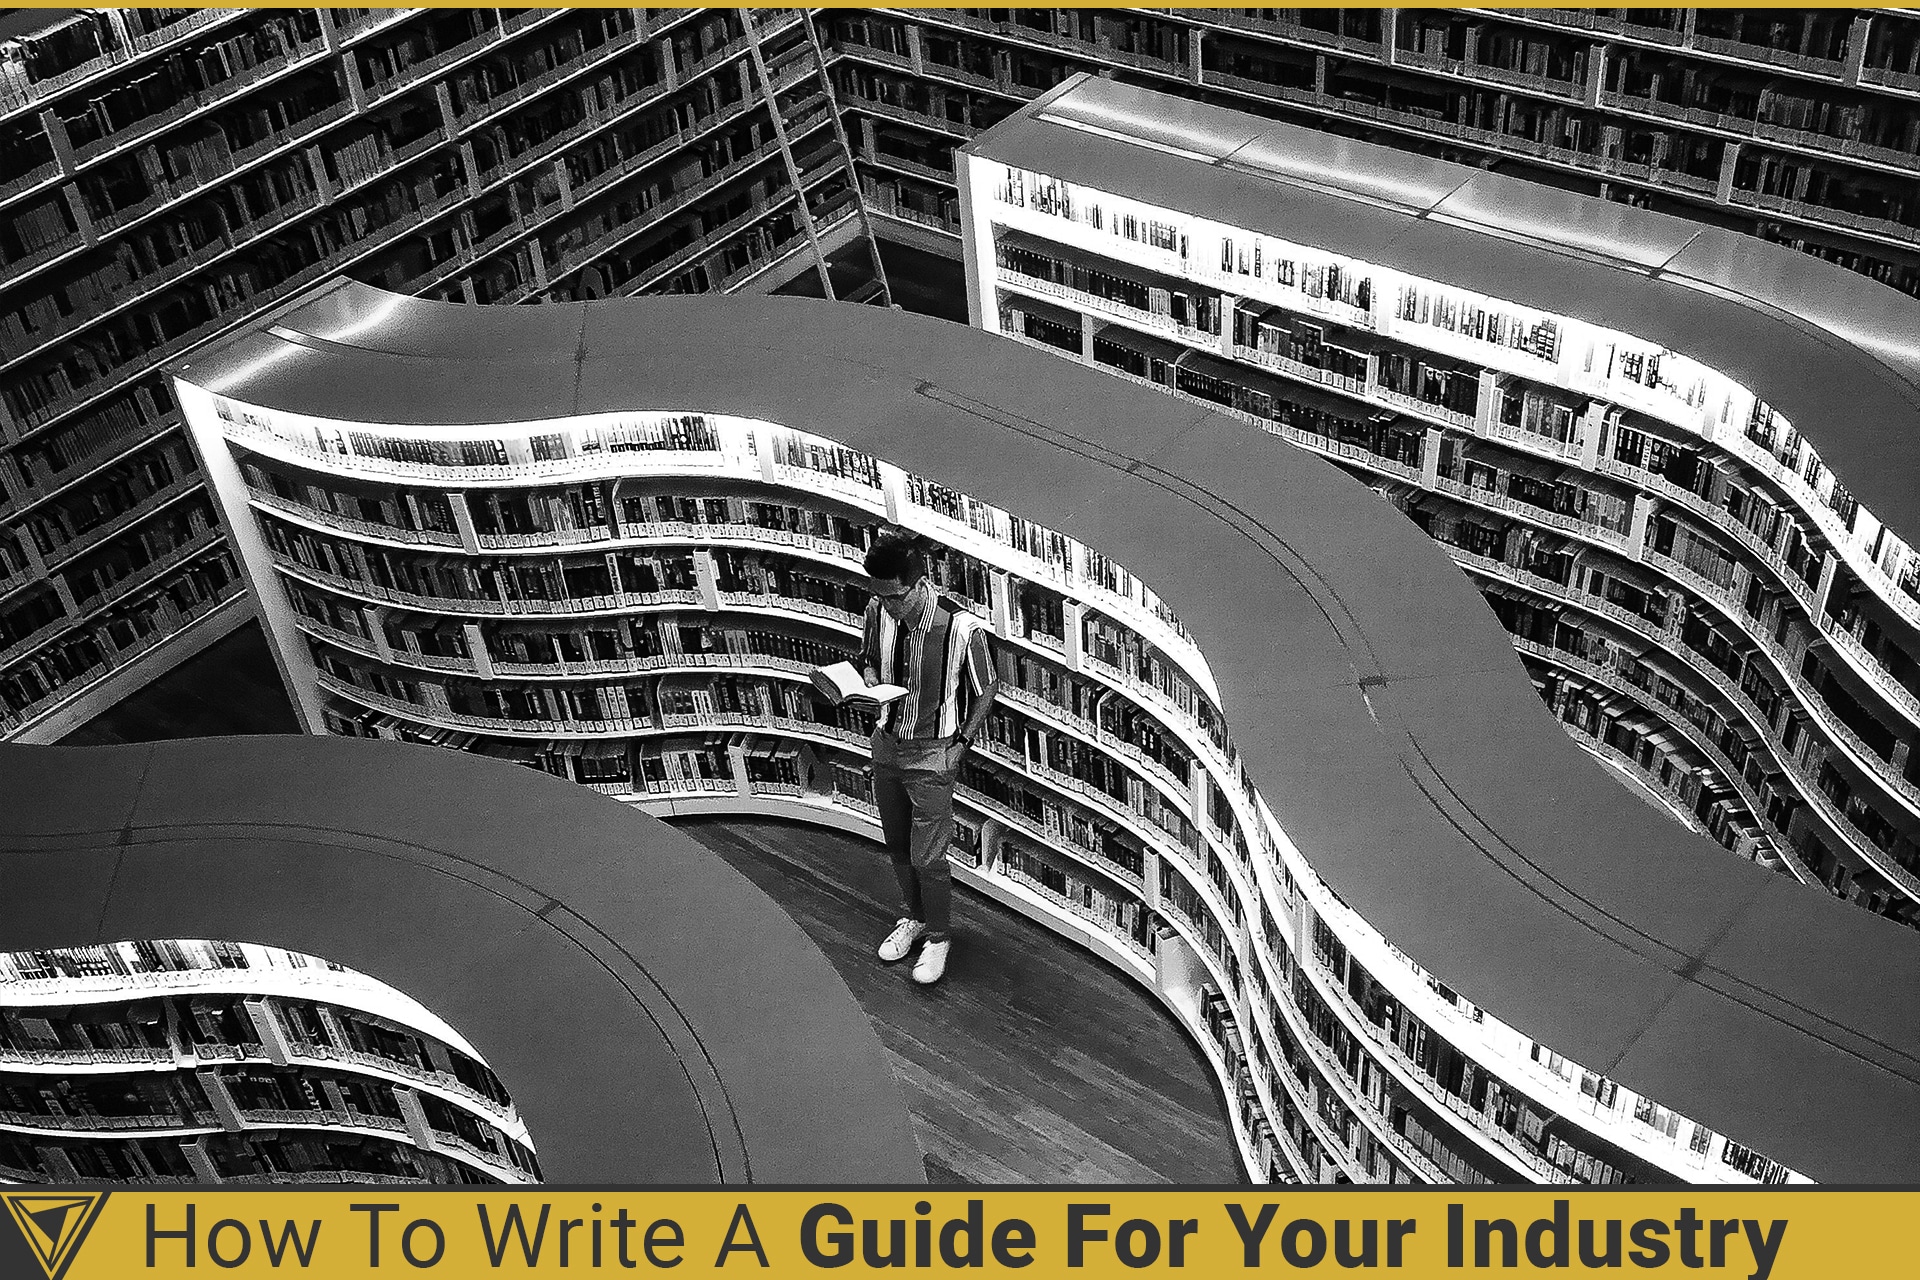 National library photo in black and white. How to write a guide for your industry.